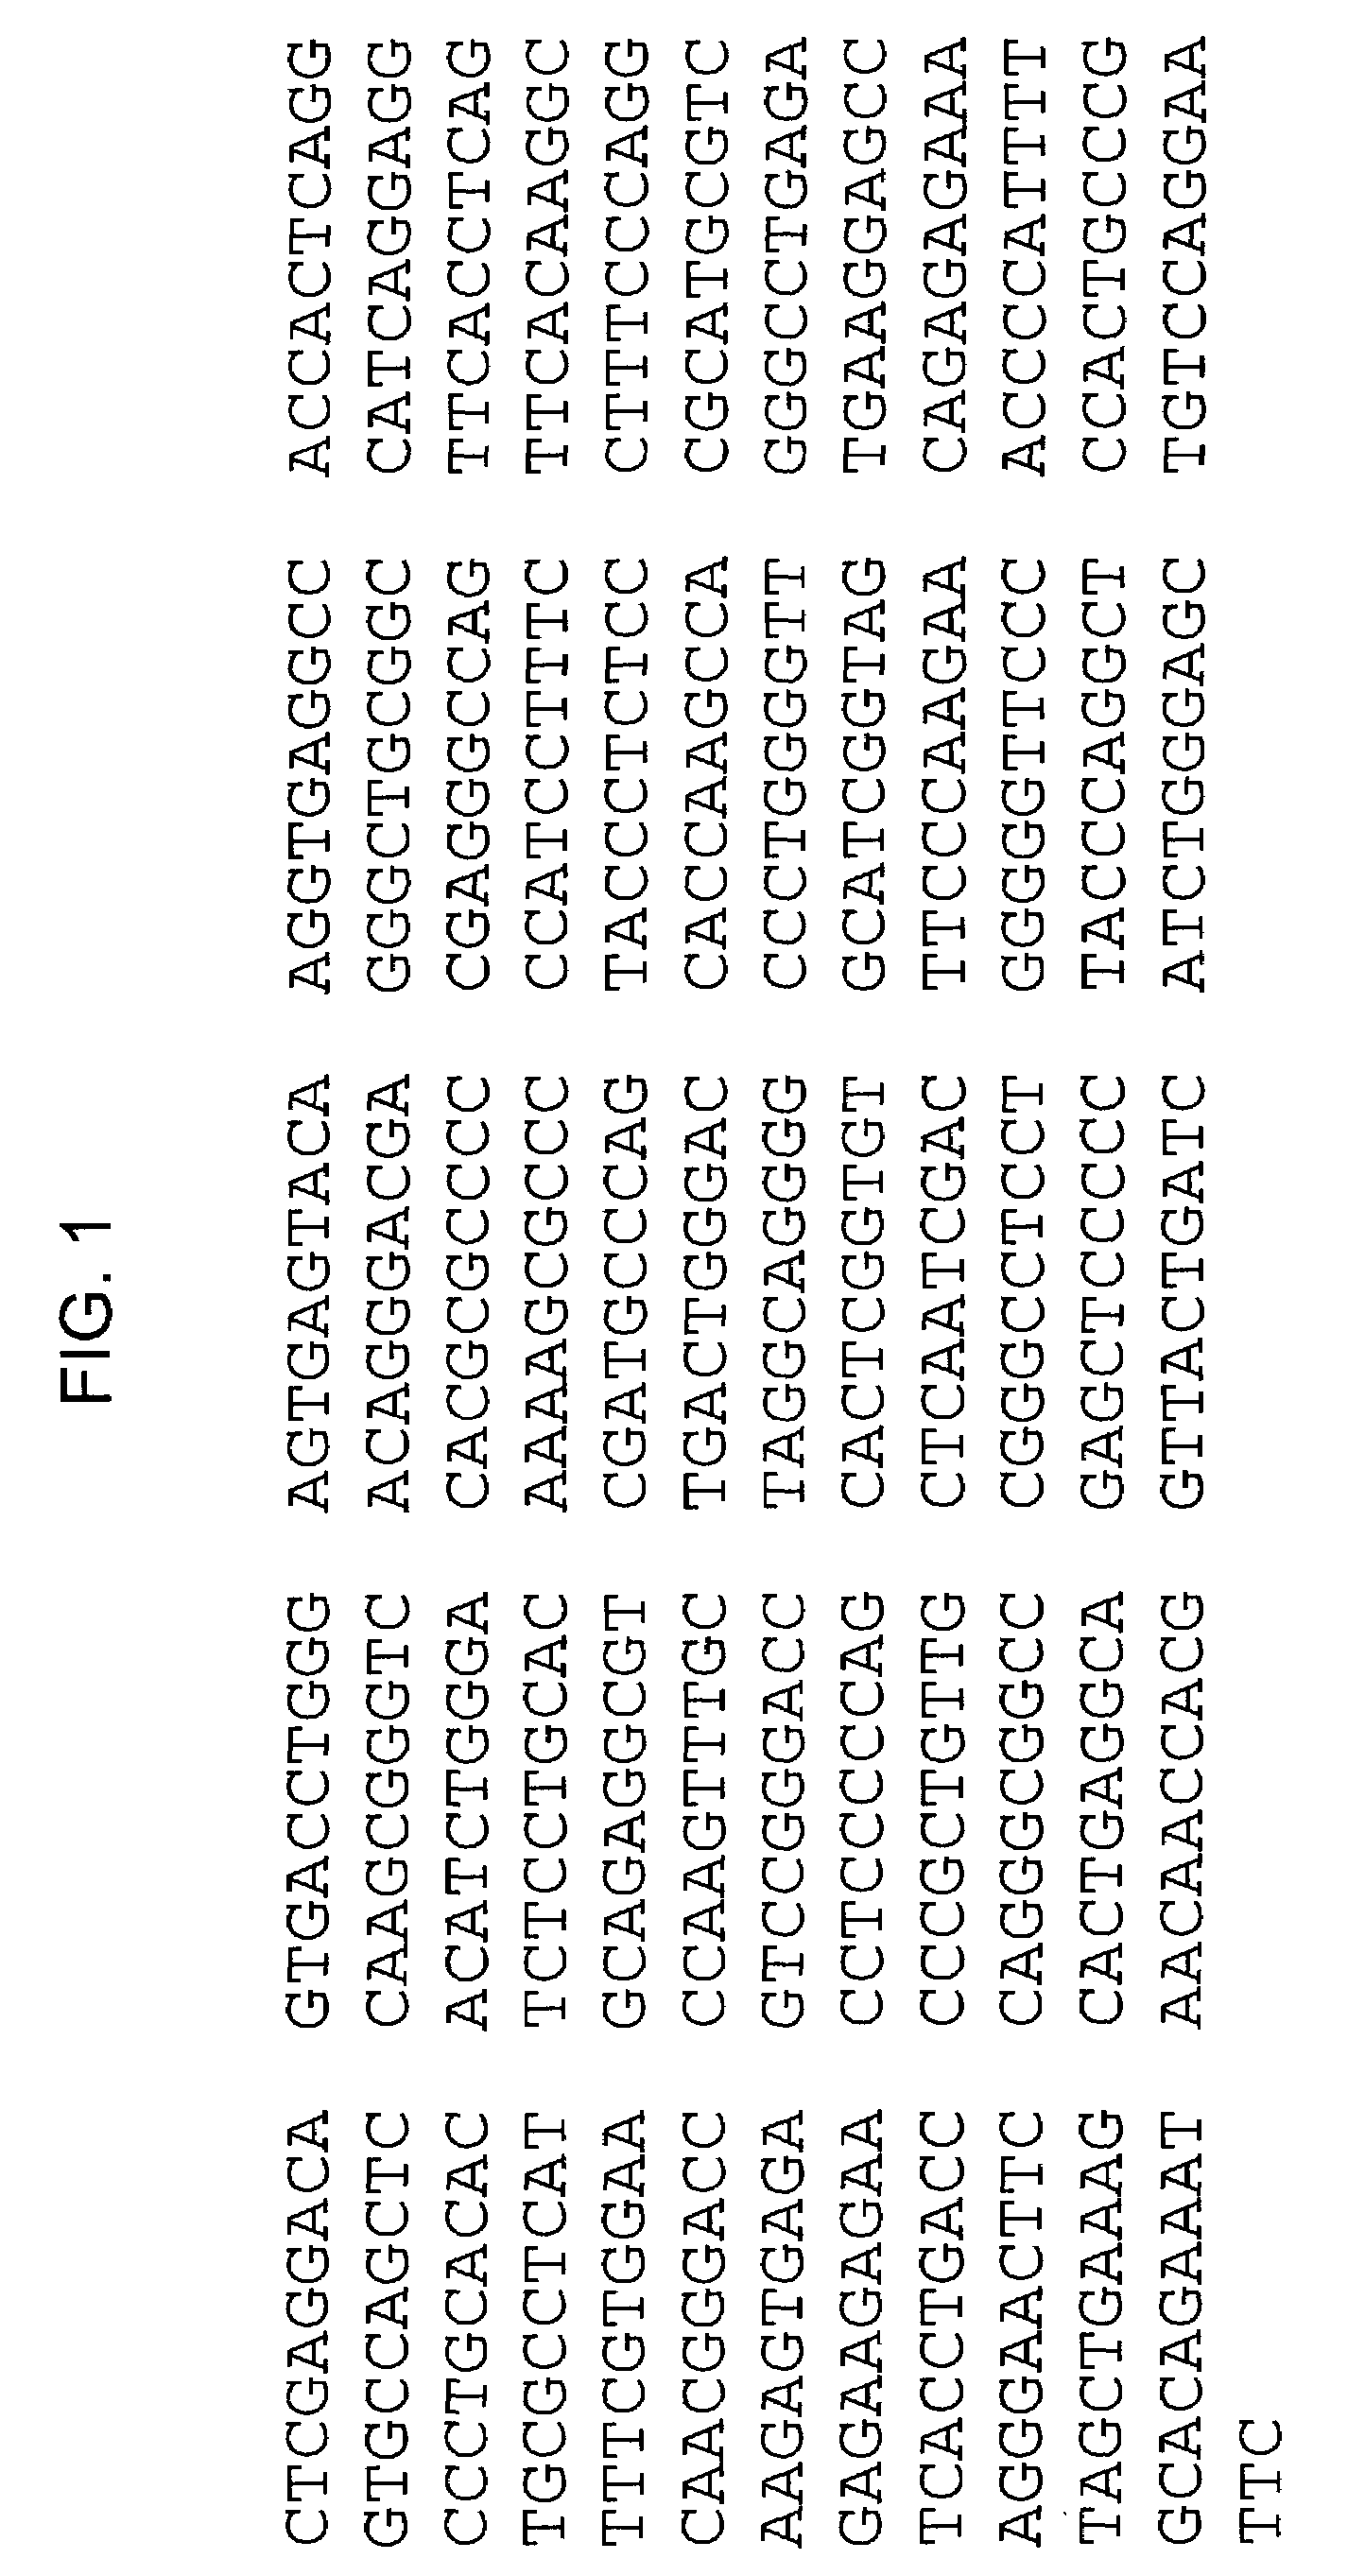 Compounds that modulate processes associated with IgE production